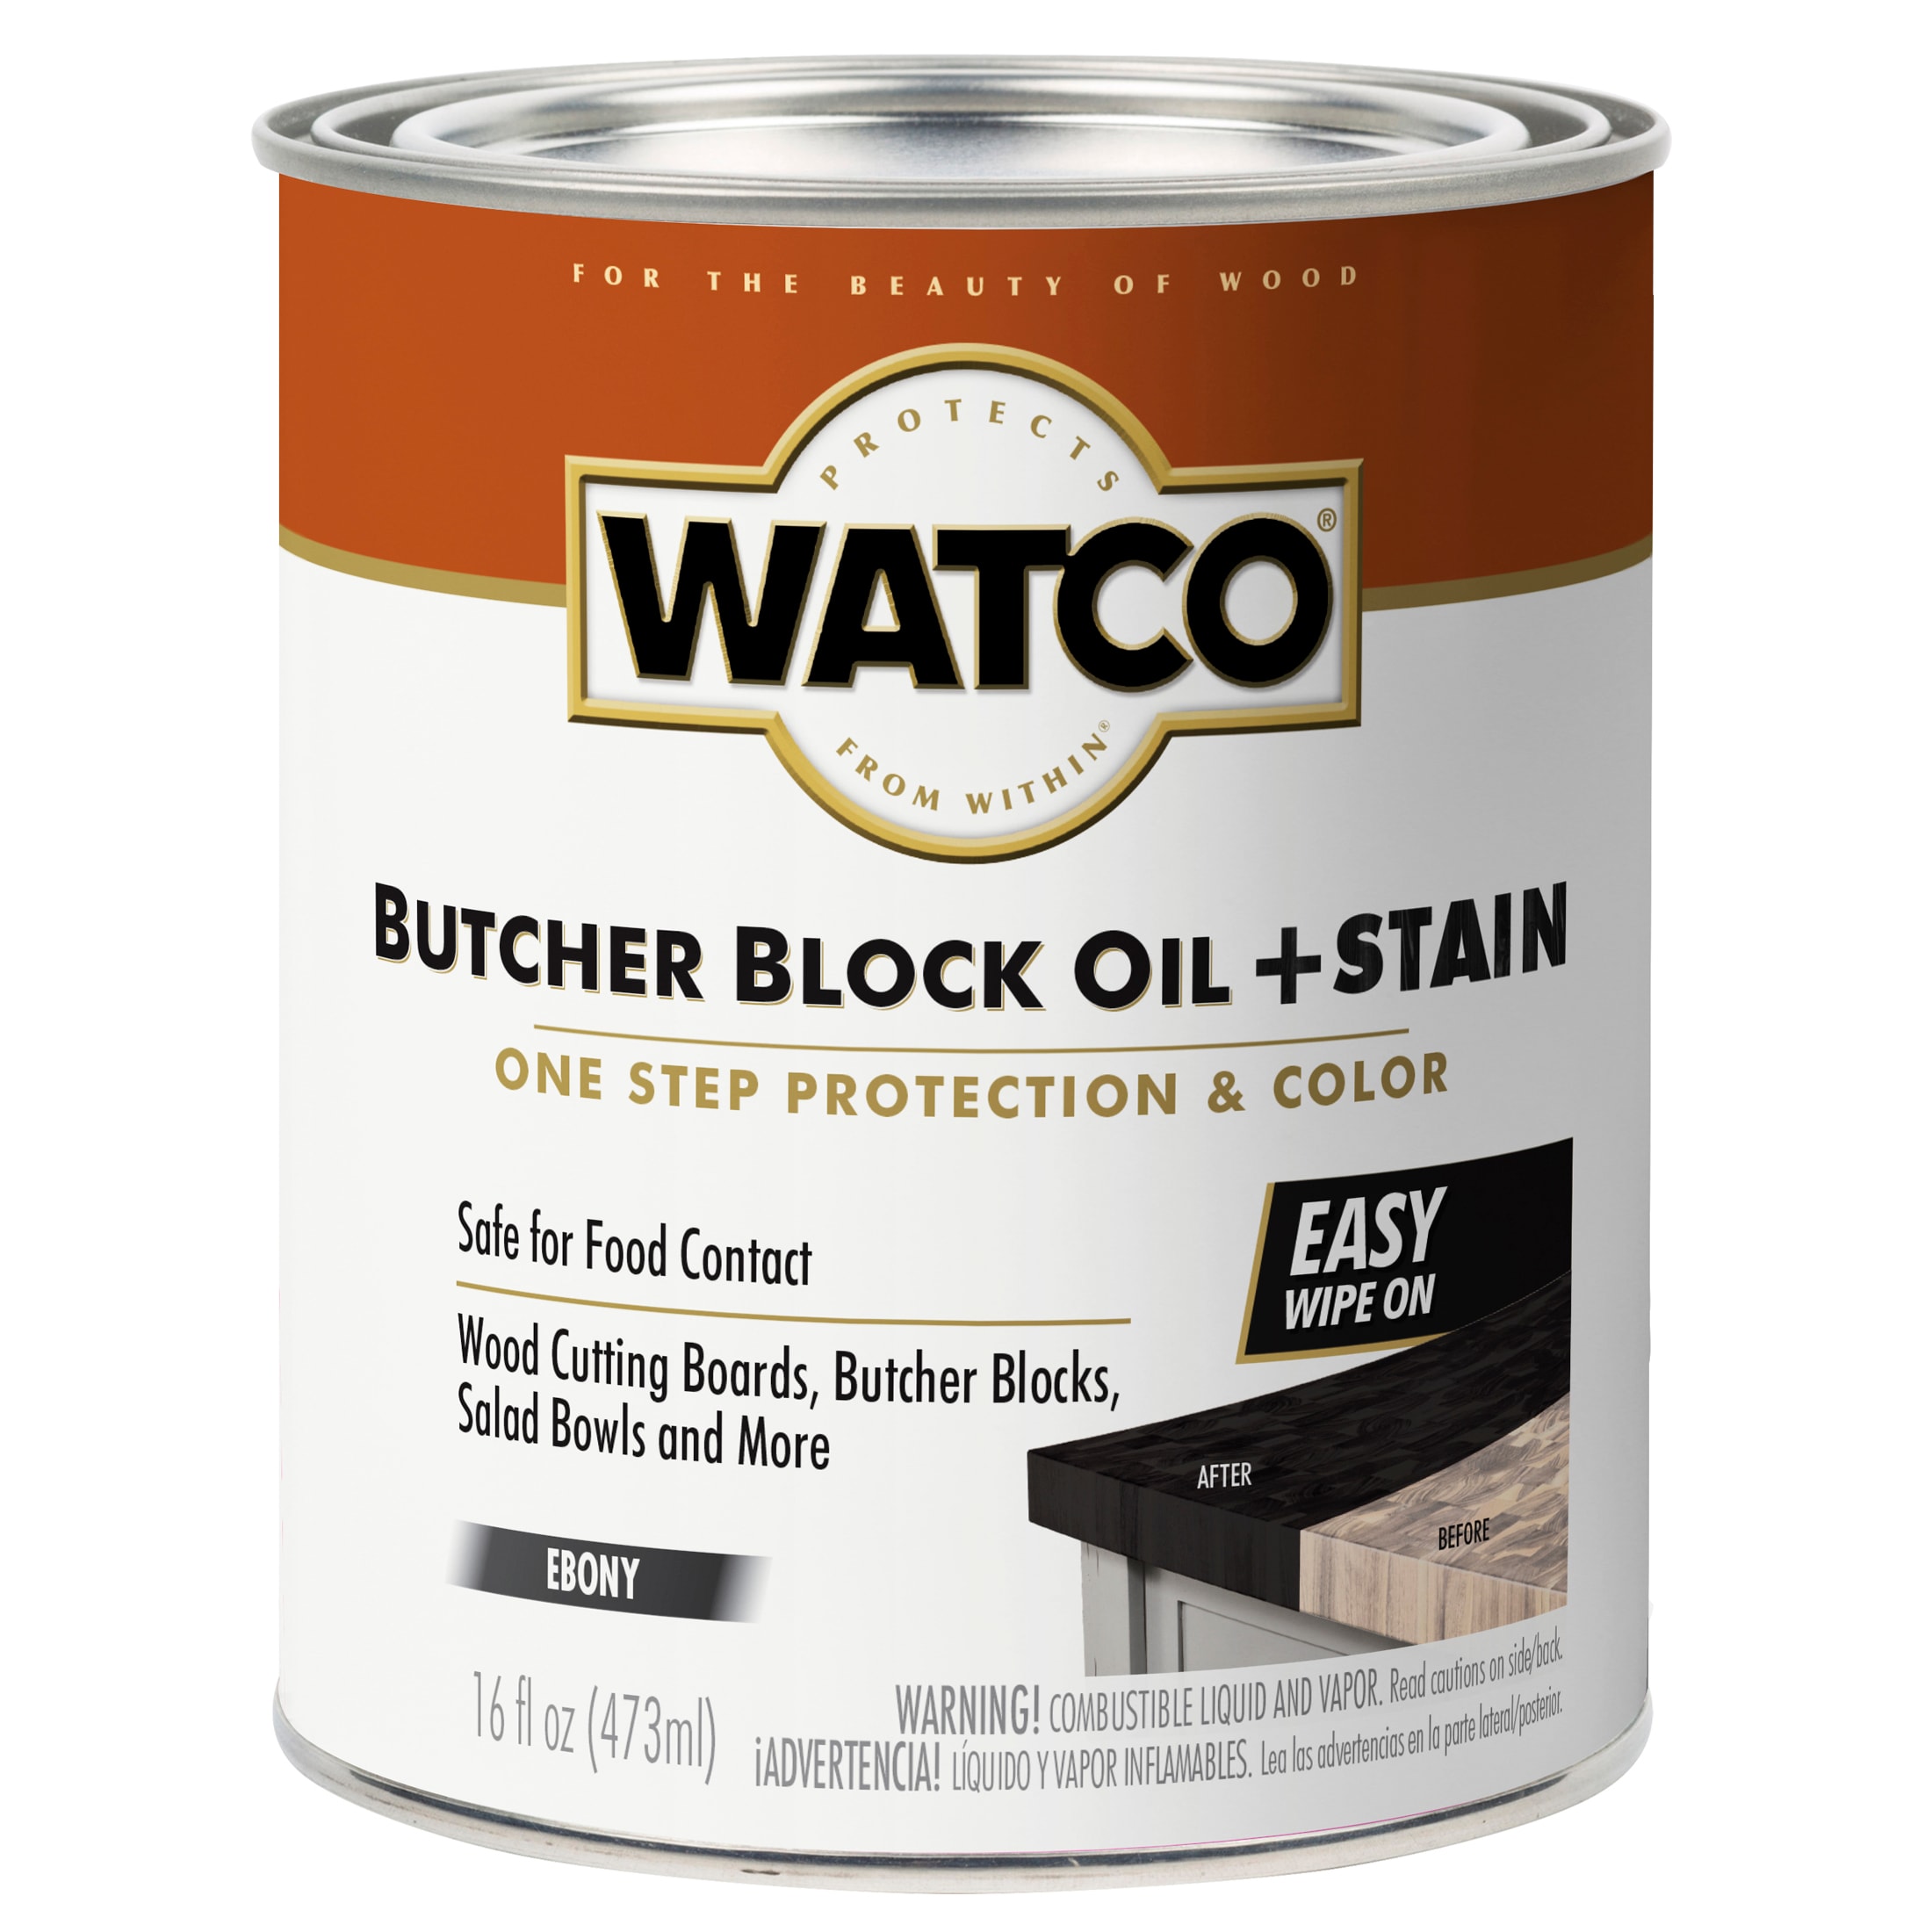 WATCO® Lacquer Clear Wood Finish Spray Product Page